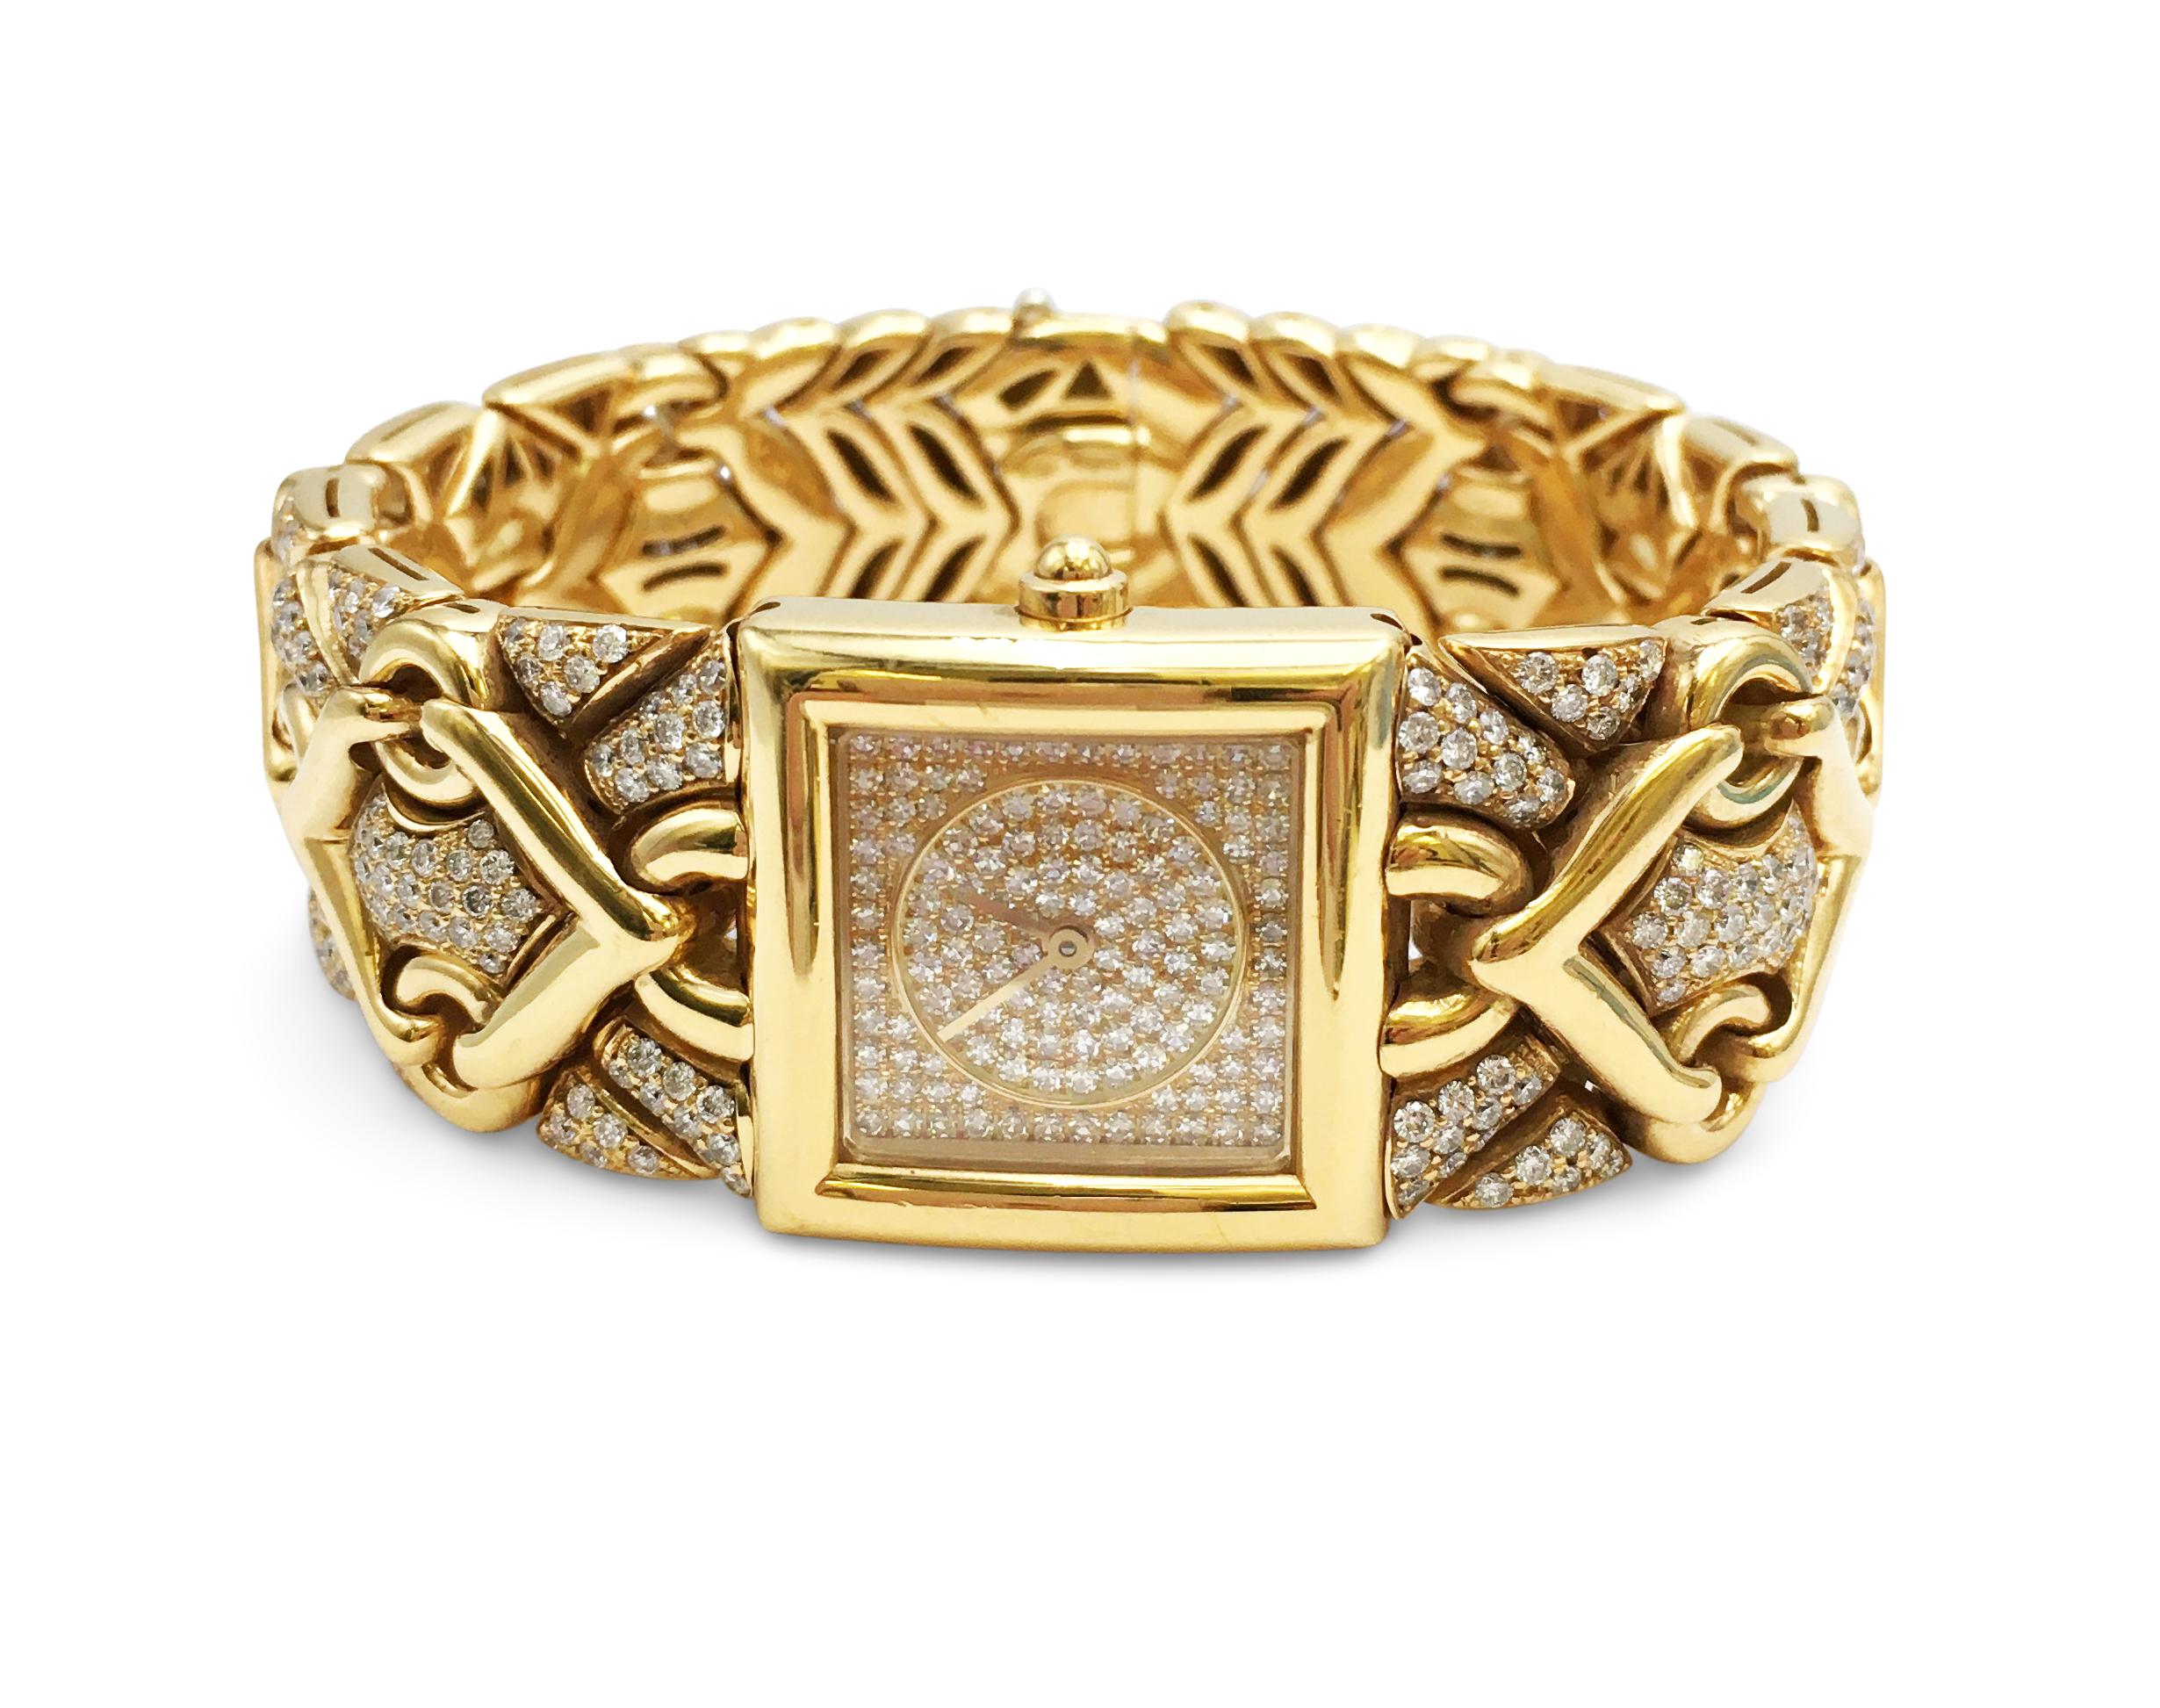 Authentic Bulgari 'Trika' ladies watch crafted in 18 karat yellow gold featuring a chevron-patterned band that is set with an estimated 3.95 carats of high-quality round brilliant cut diamonds. The square-shaped dial is set with pave diamonds